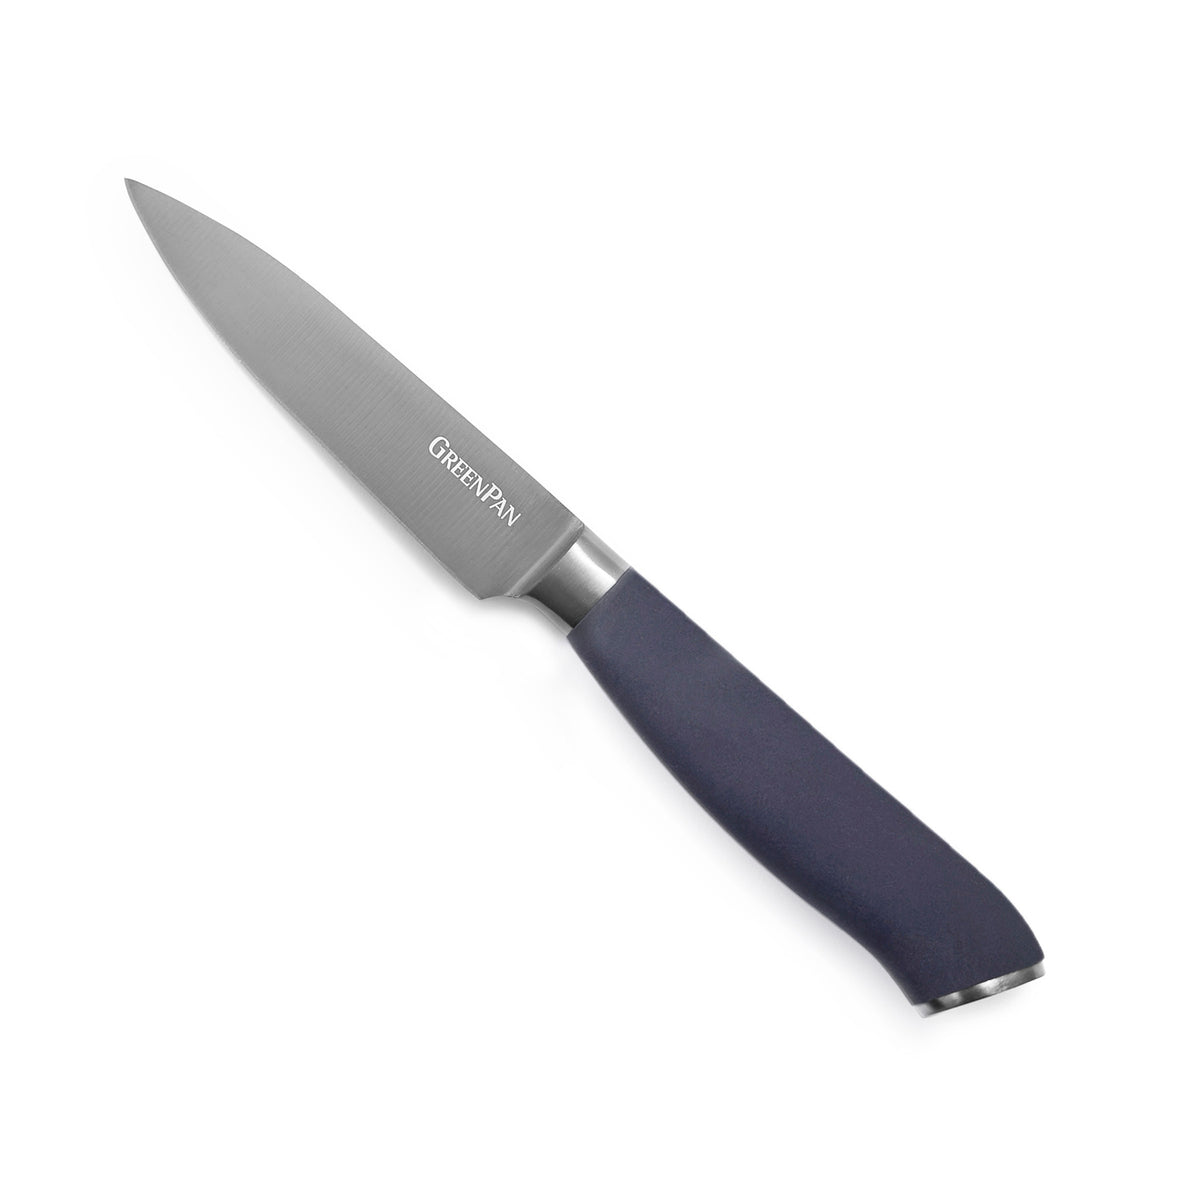 What Is a Paring Knife Used For?